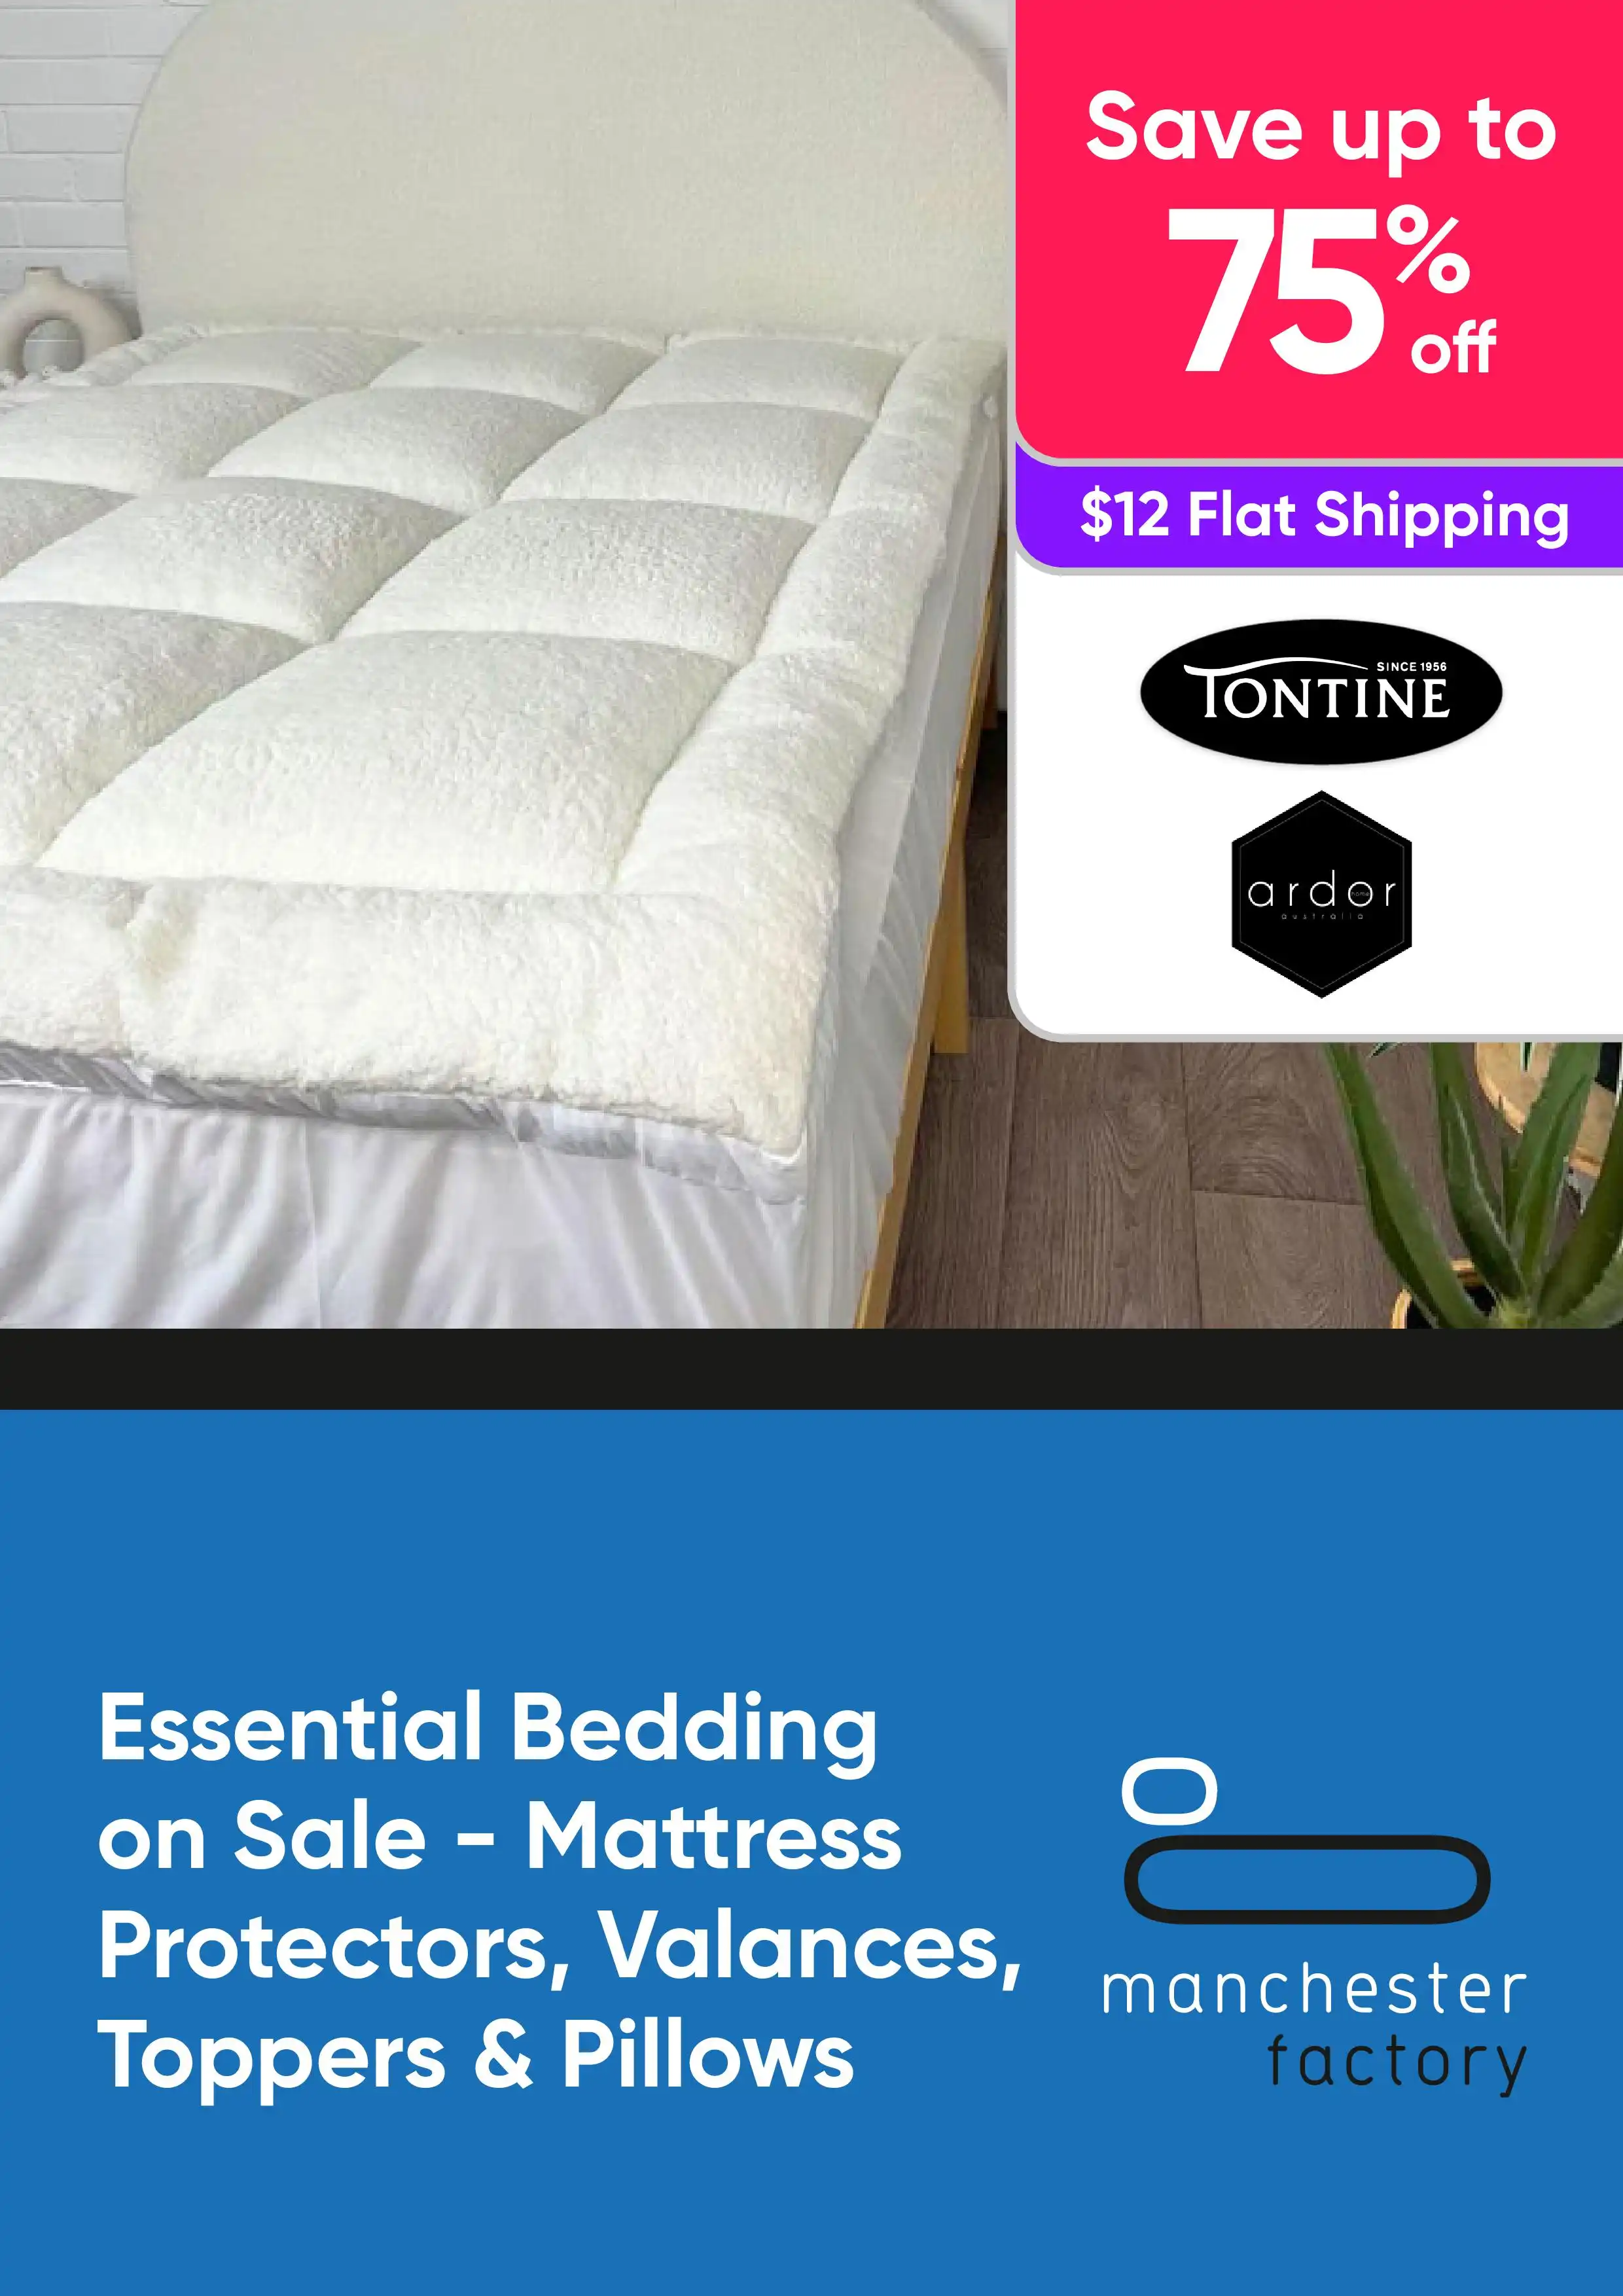 Essential Bedding on Sale up to 75% Off RRP - Shop Mattress Protectors, Valances & More